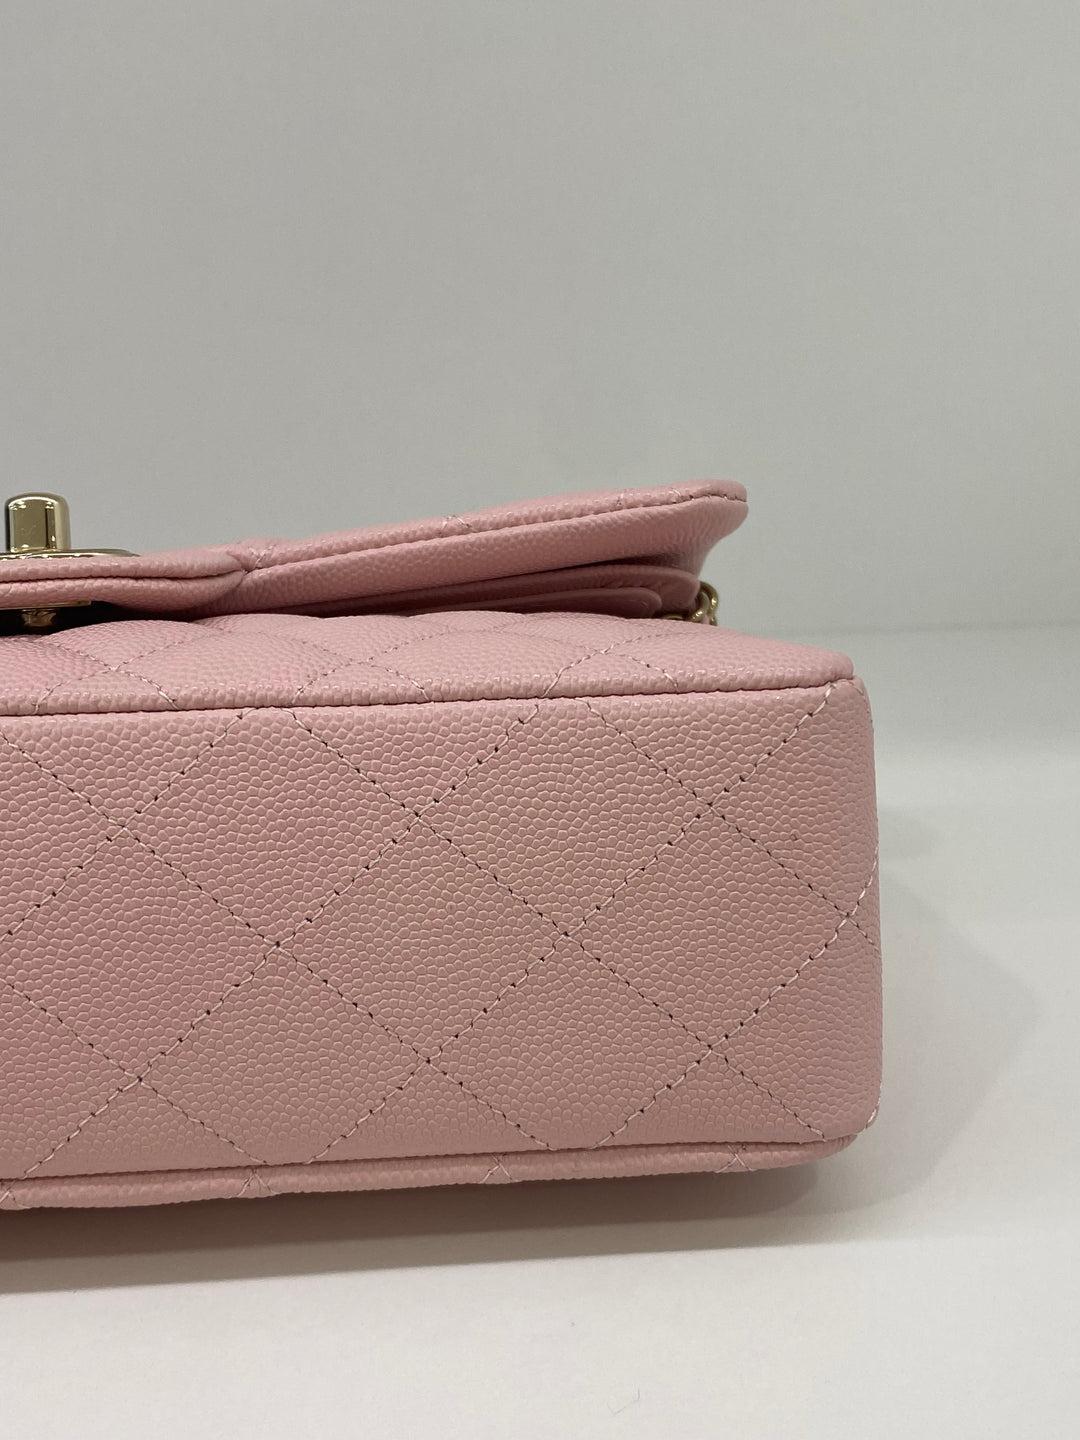 Chanel Classic Flap Small Soft Pink CGHW For Sale 7